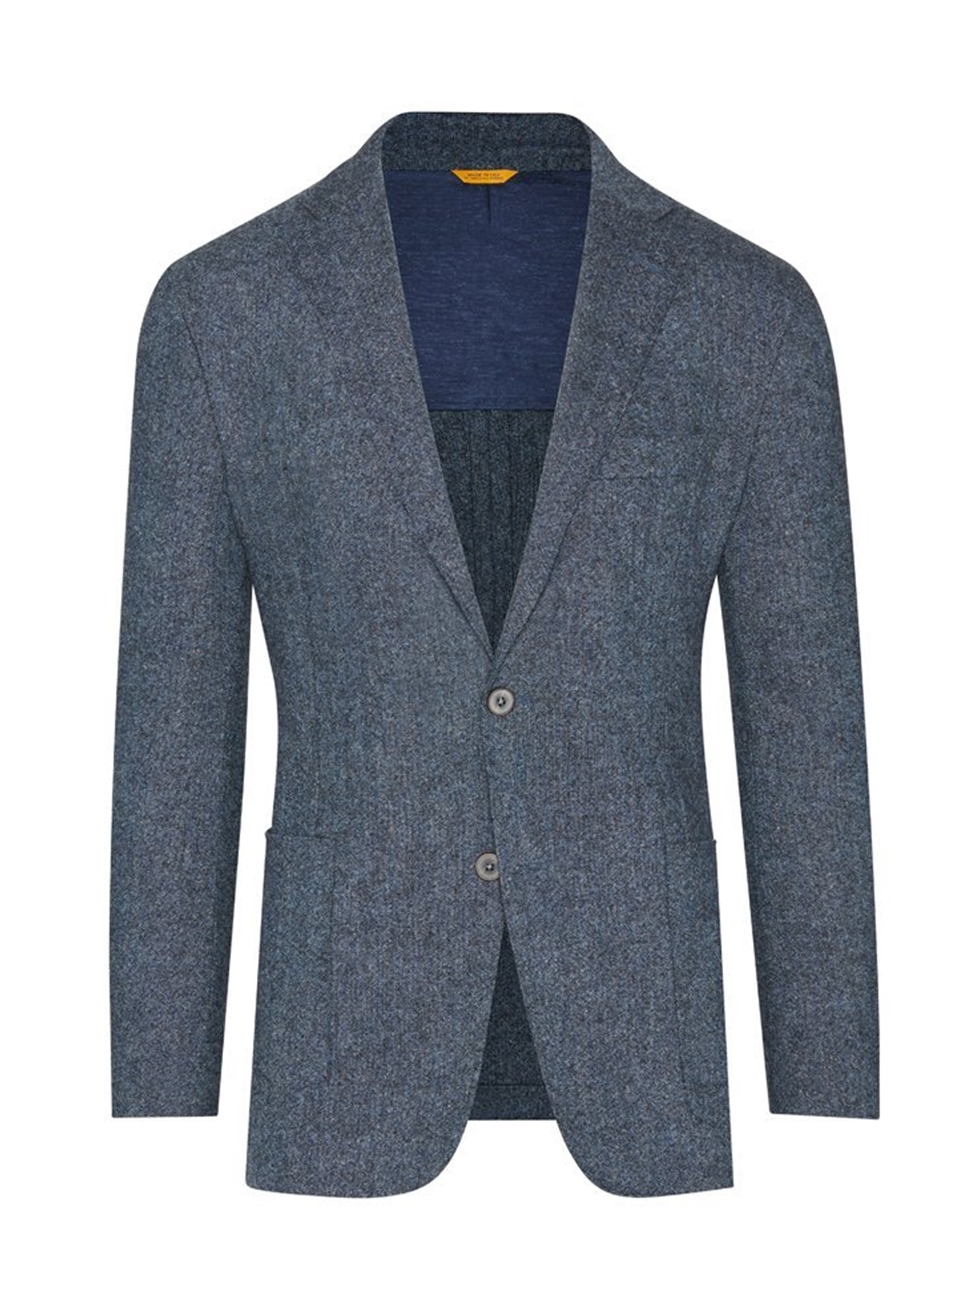 Blue Stretch Donegal Tweed B-Fit Men Jacket | Hickey Freeman Sportcoats ...